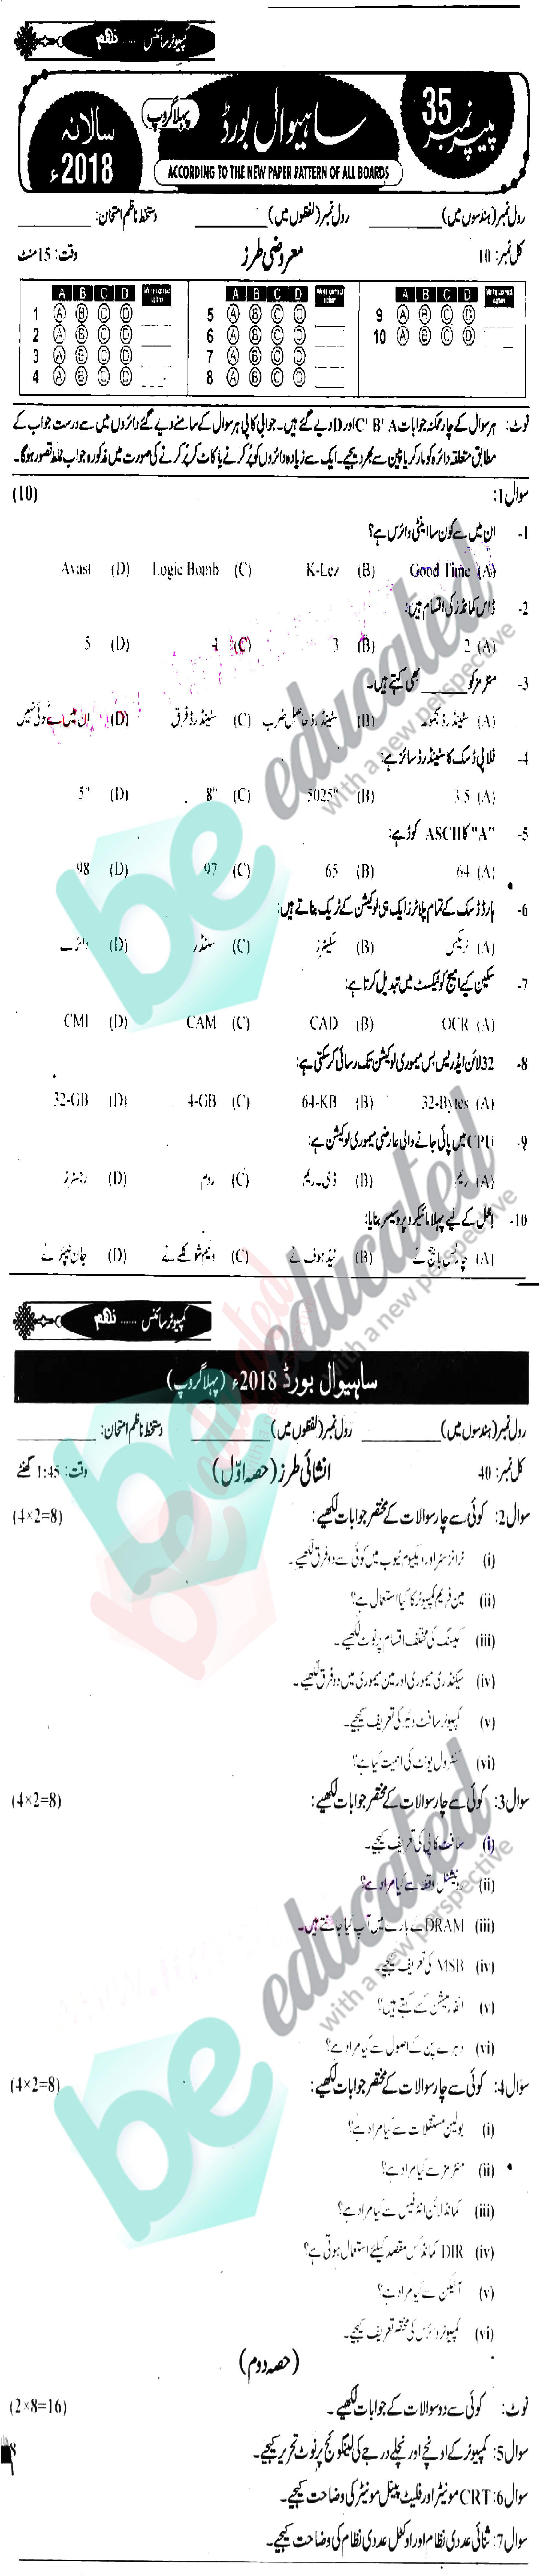 Computer Science 9th class Past Paper Group 1 BISE Sahiwal 2018